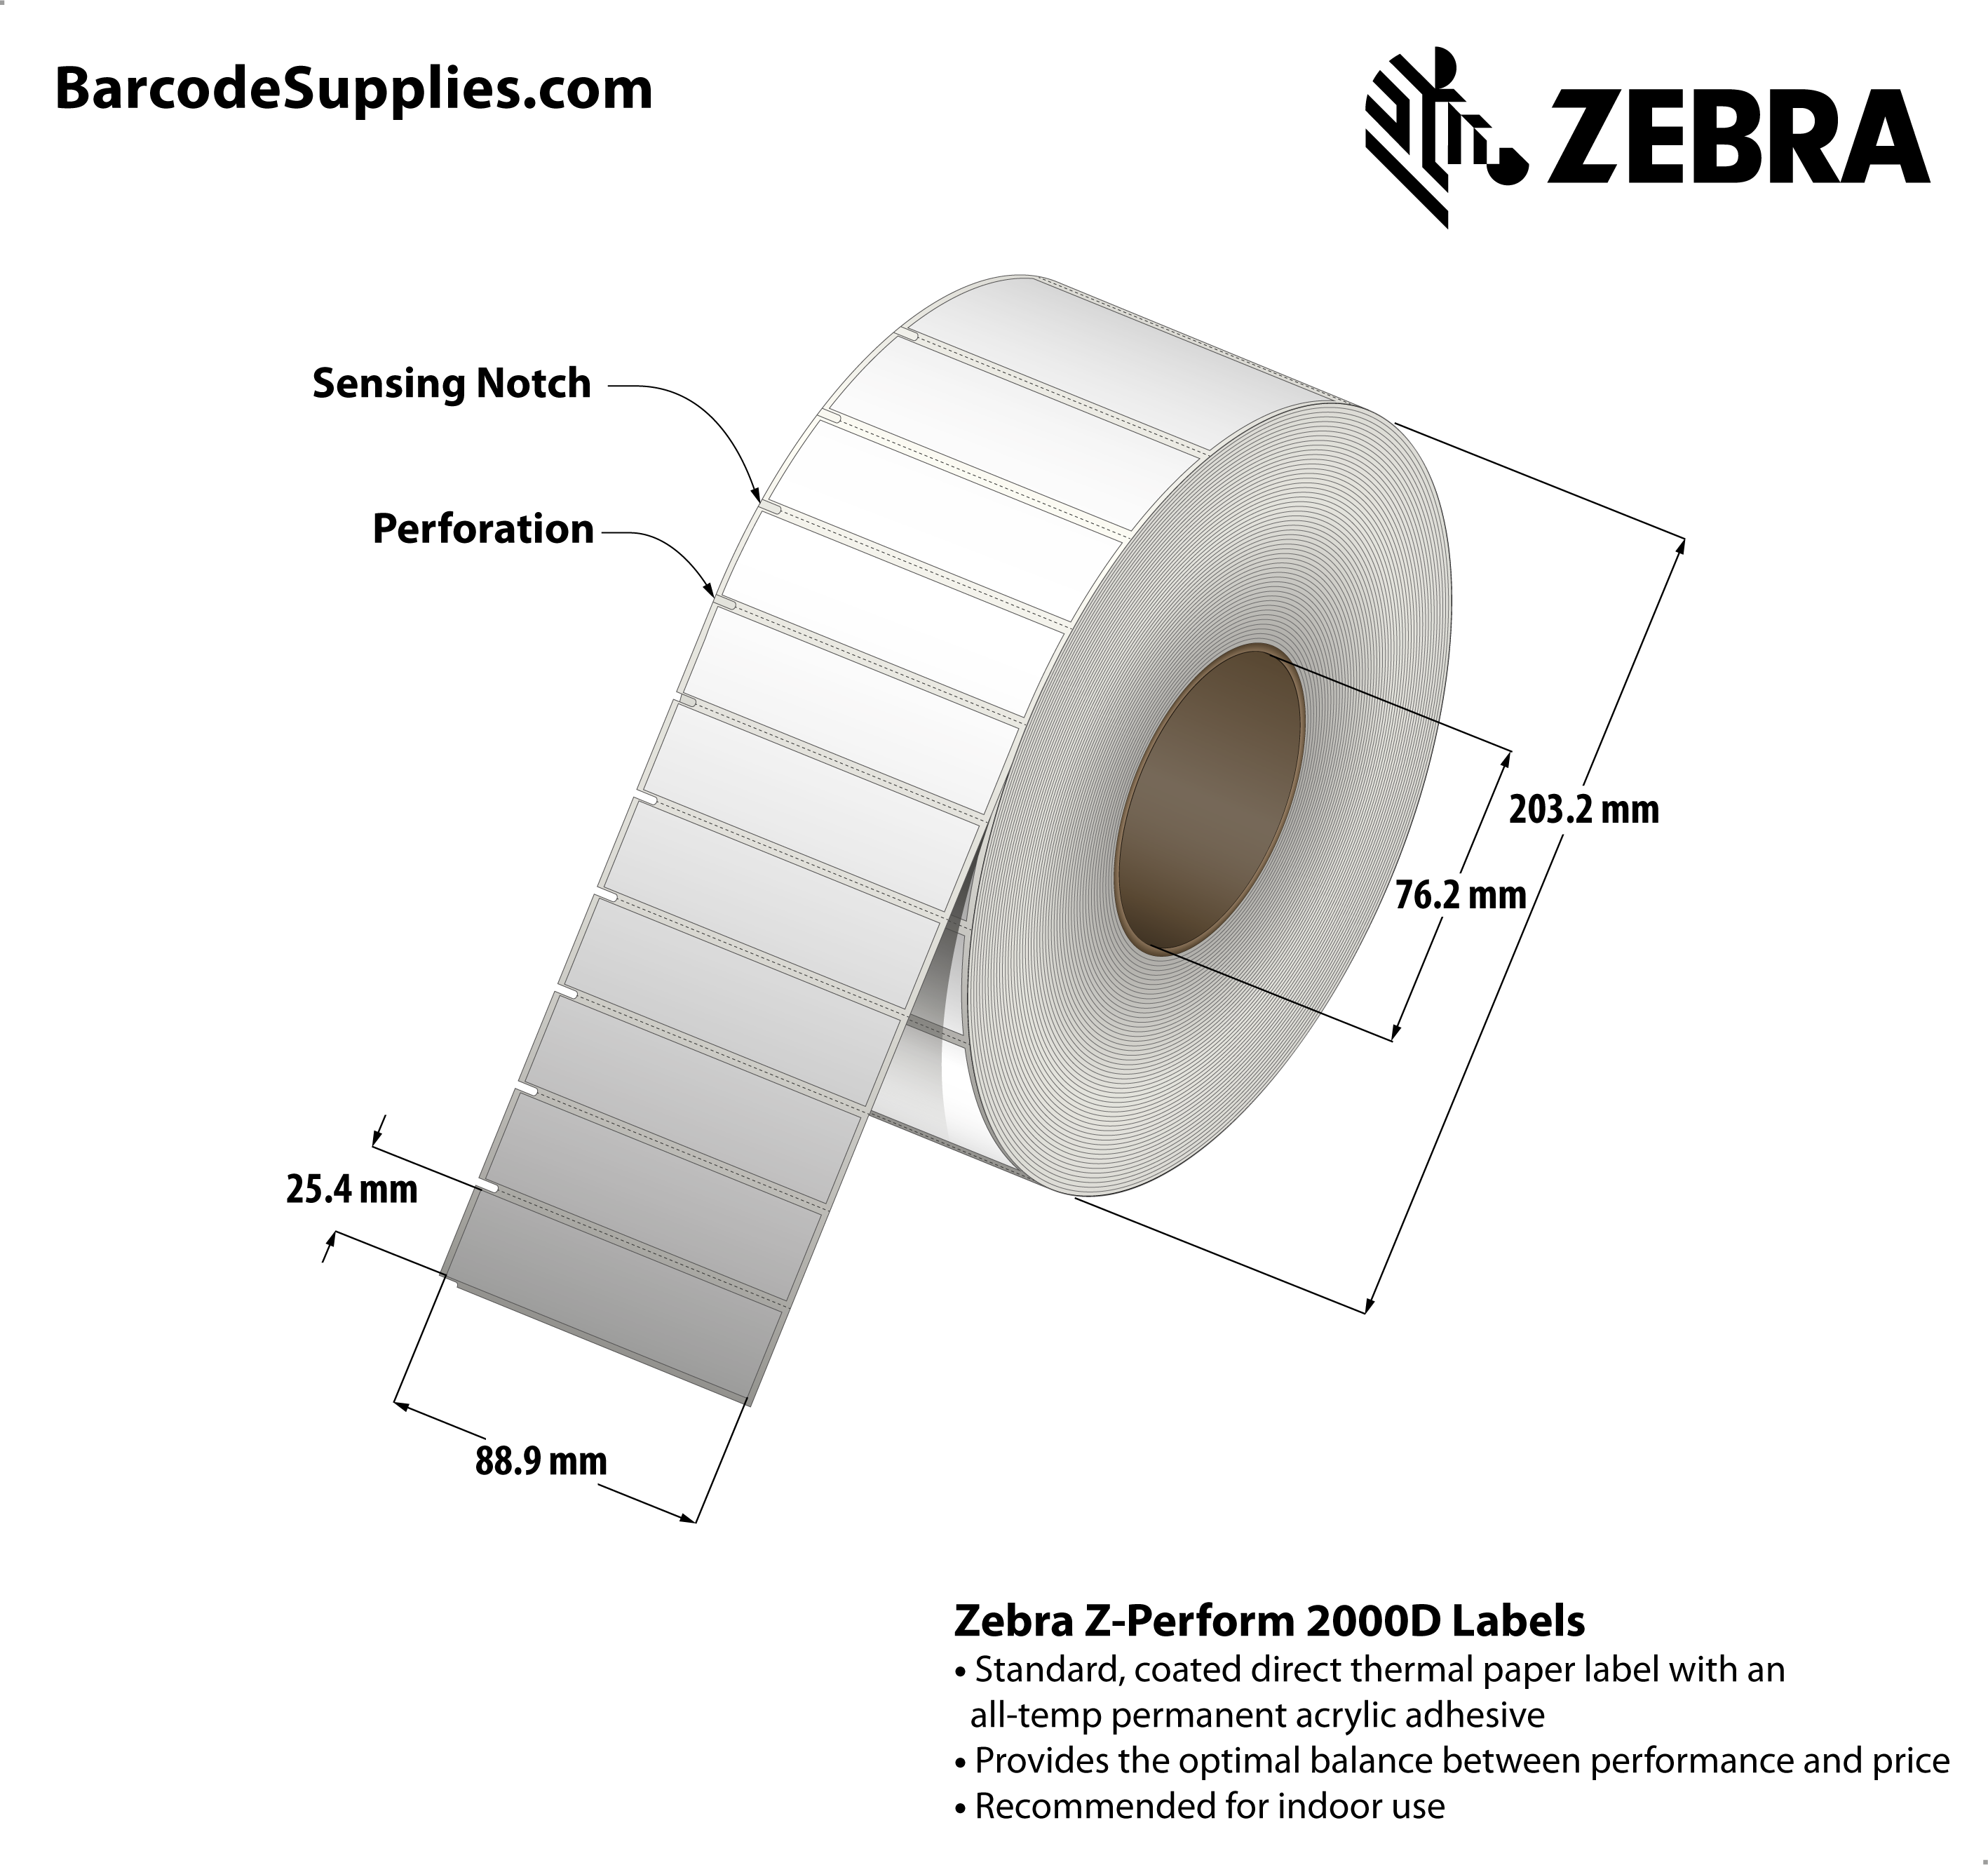 3.5 x 1 Direct Thermal White Z-Perform 2000D Labels With Permanent Adhesive - Label has square edges and side sensing notches on left side. - Perforated - 5800 Labels Per Roll - Carton Of 2 Rolls - 11600 Labels Total - MPN: 10025346